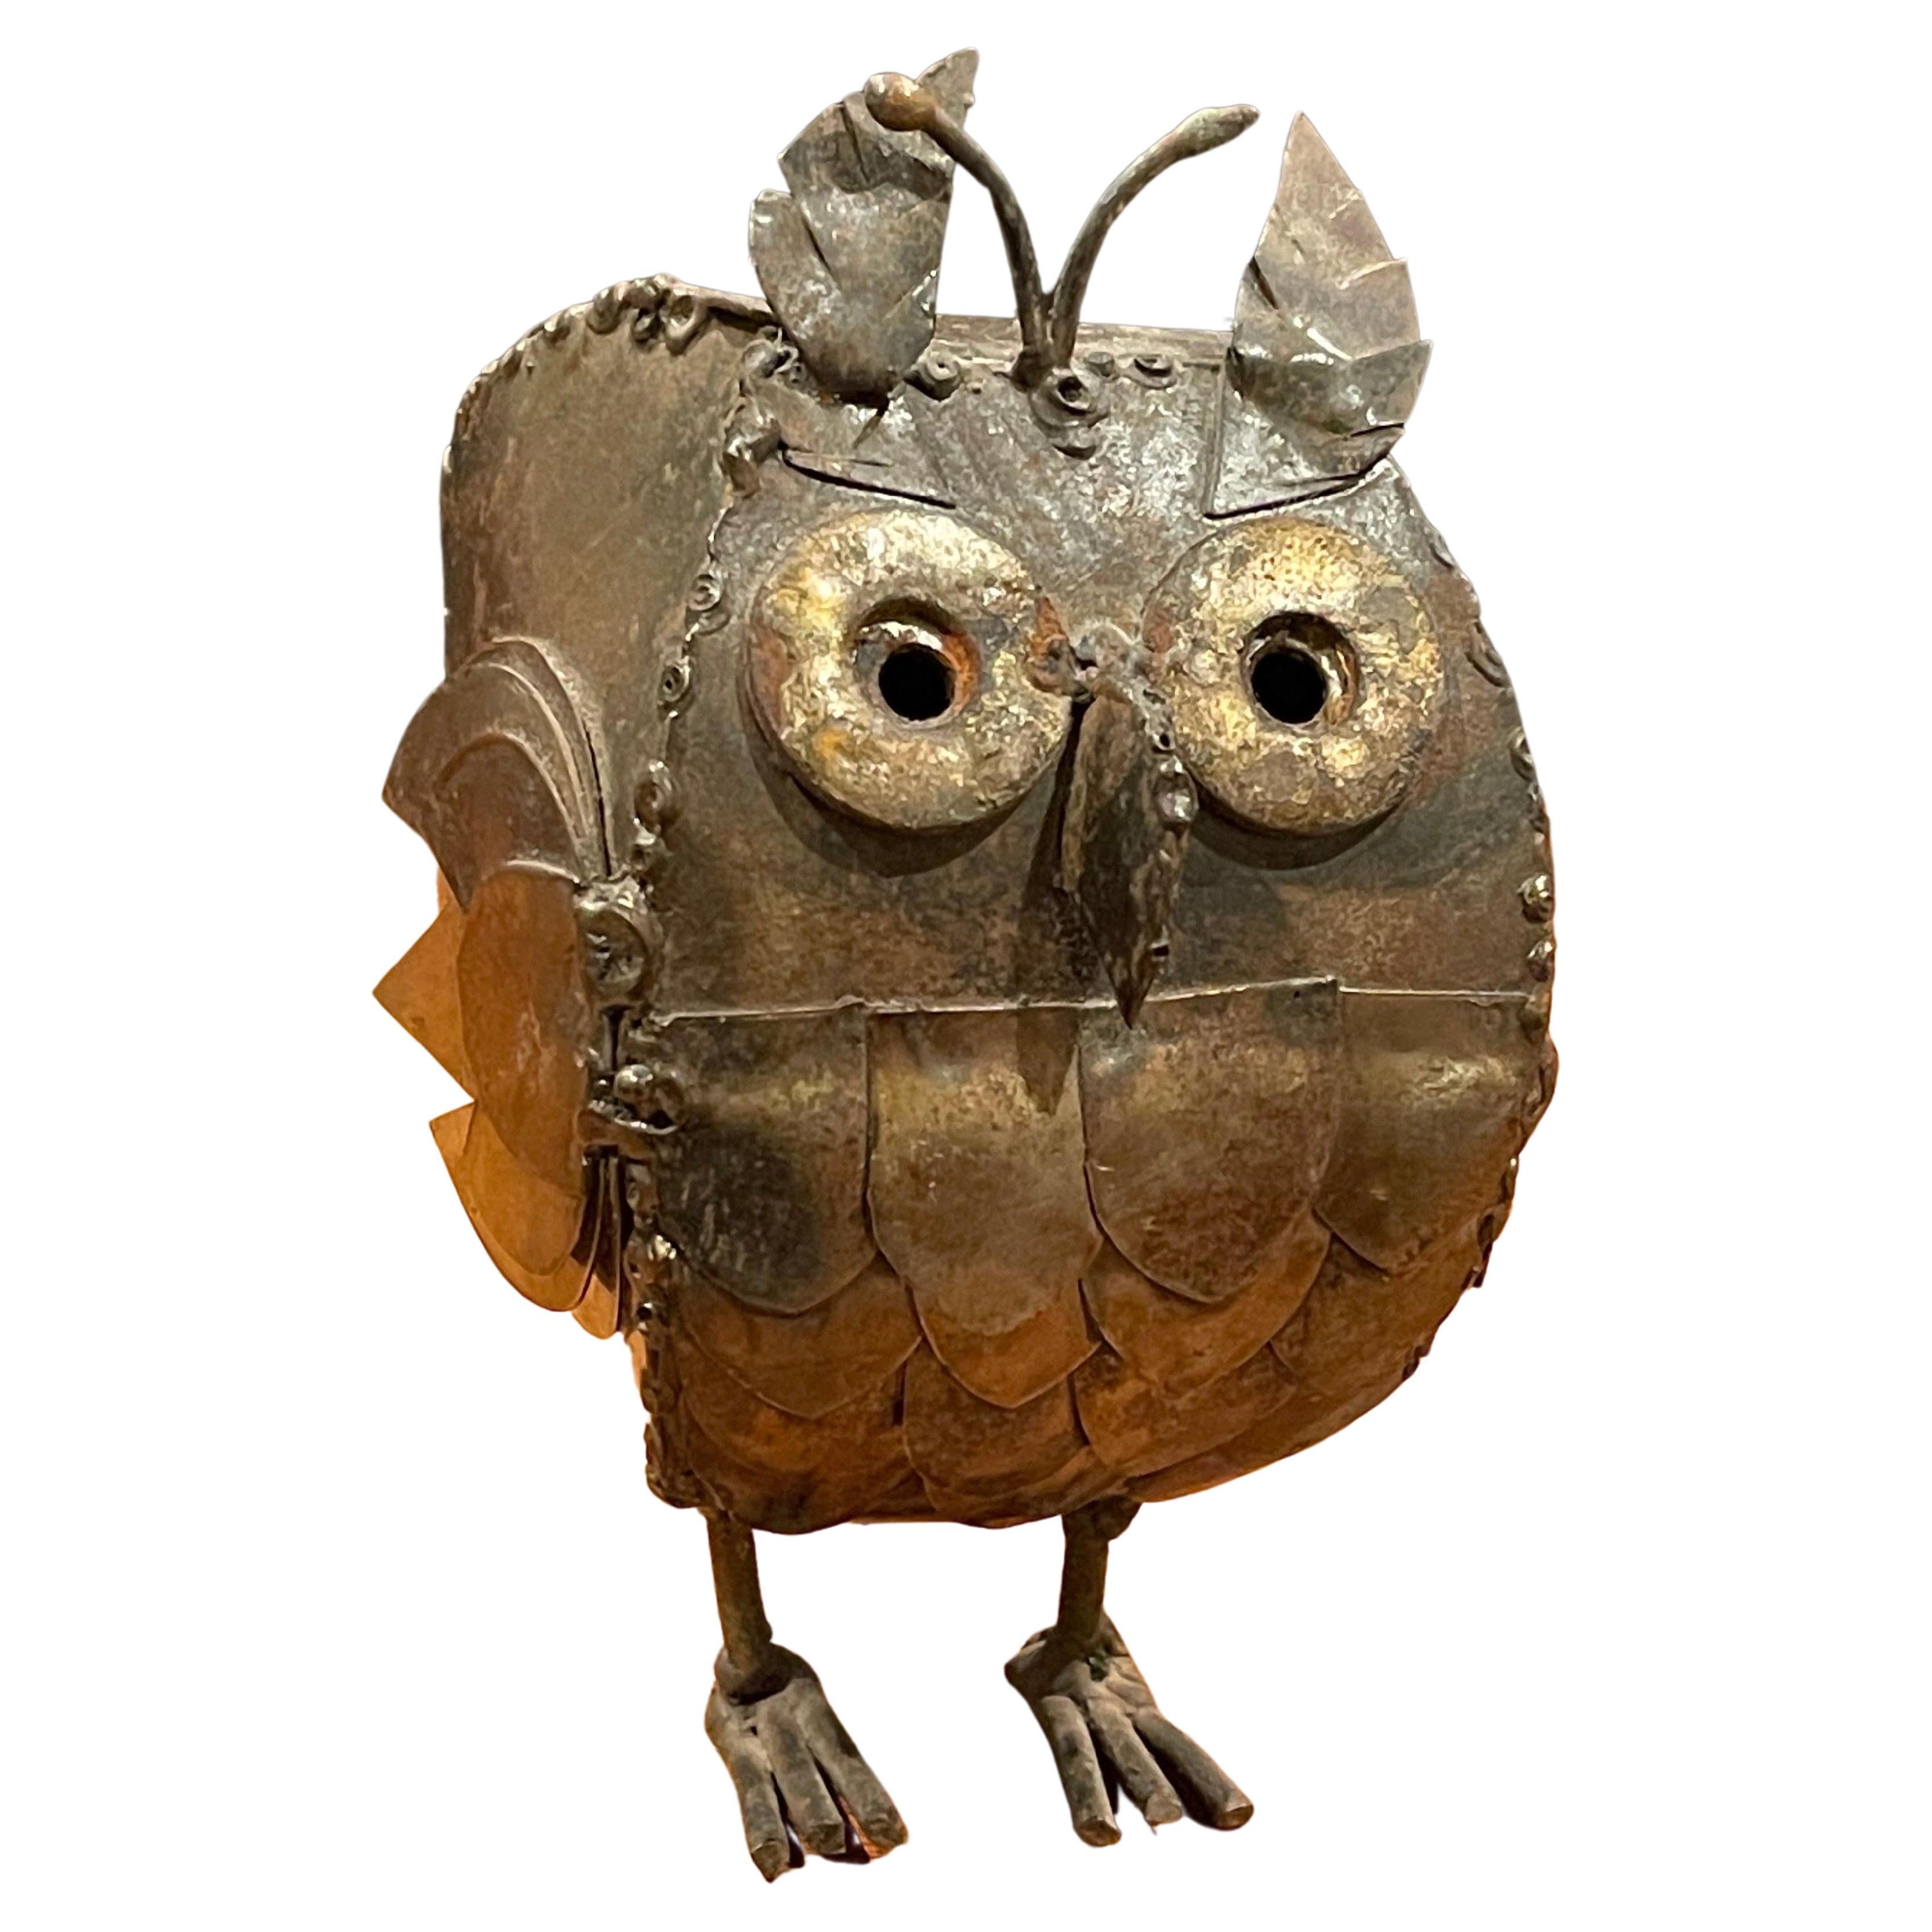 A very cool midcentury Brutalist owl sculpture, circa 1970s. The piece is made of raw welded sheet metal with a wonderful vintage patina and measures 3.25